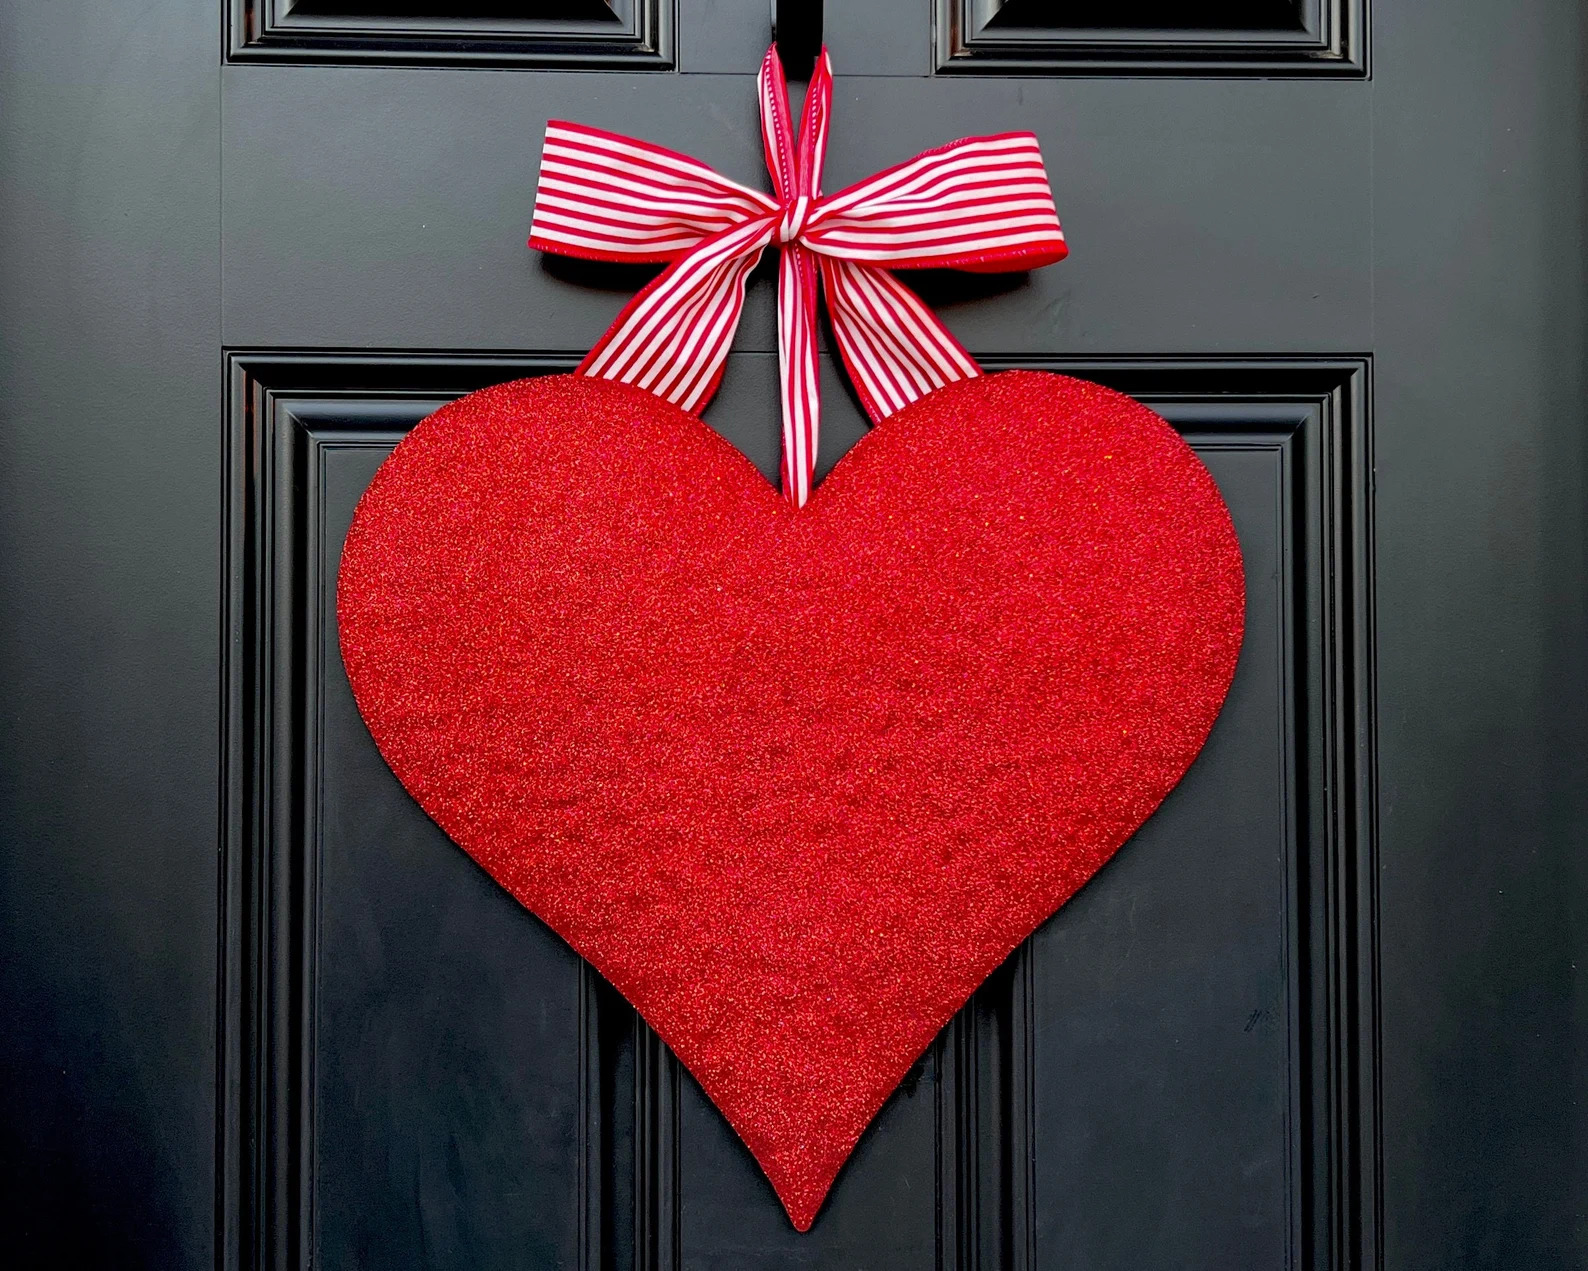 17 Cute Valentine's Day Wreath Designs To Hang Up On Your Front Door